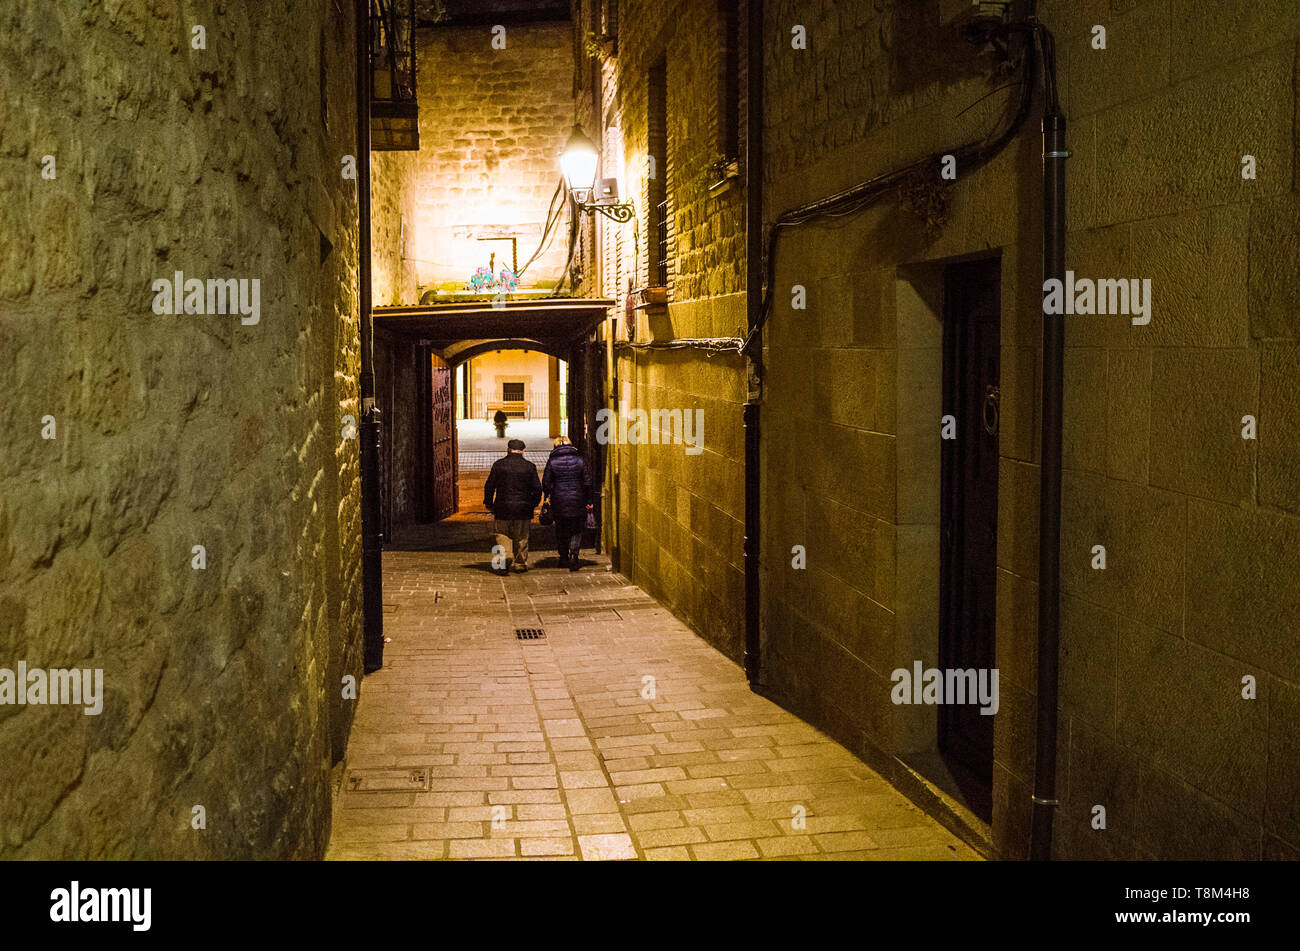 Laguardia, Álava province, Basque Country, Spain : A man and a woman walk under an arch at a narrow alley illuminated at night in the historic town of Stock Photo